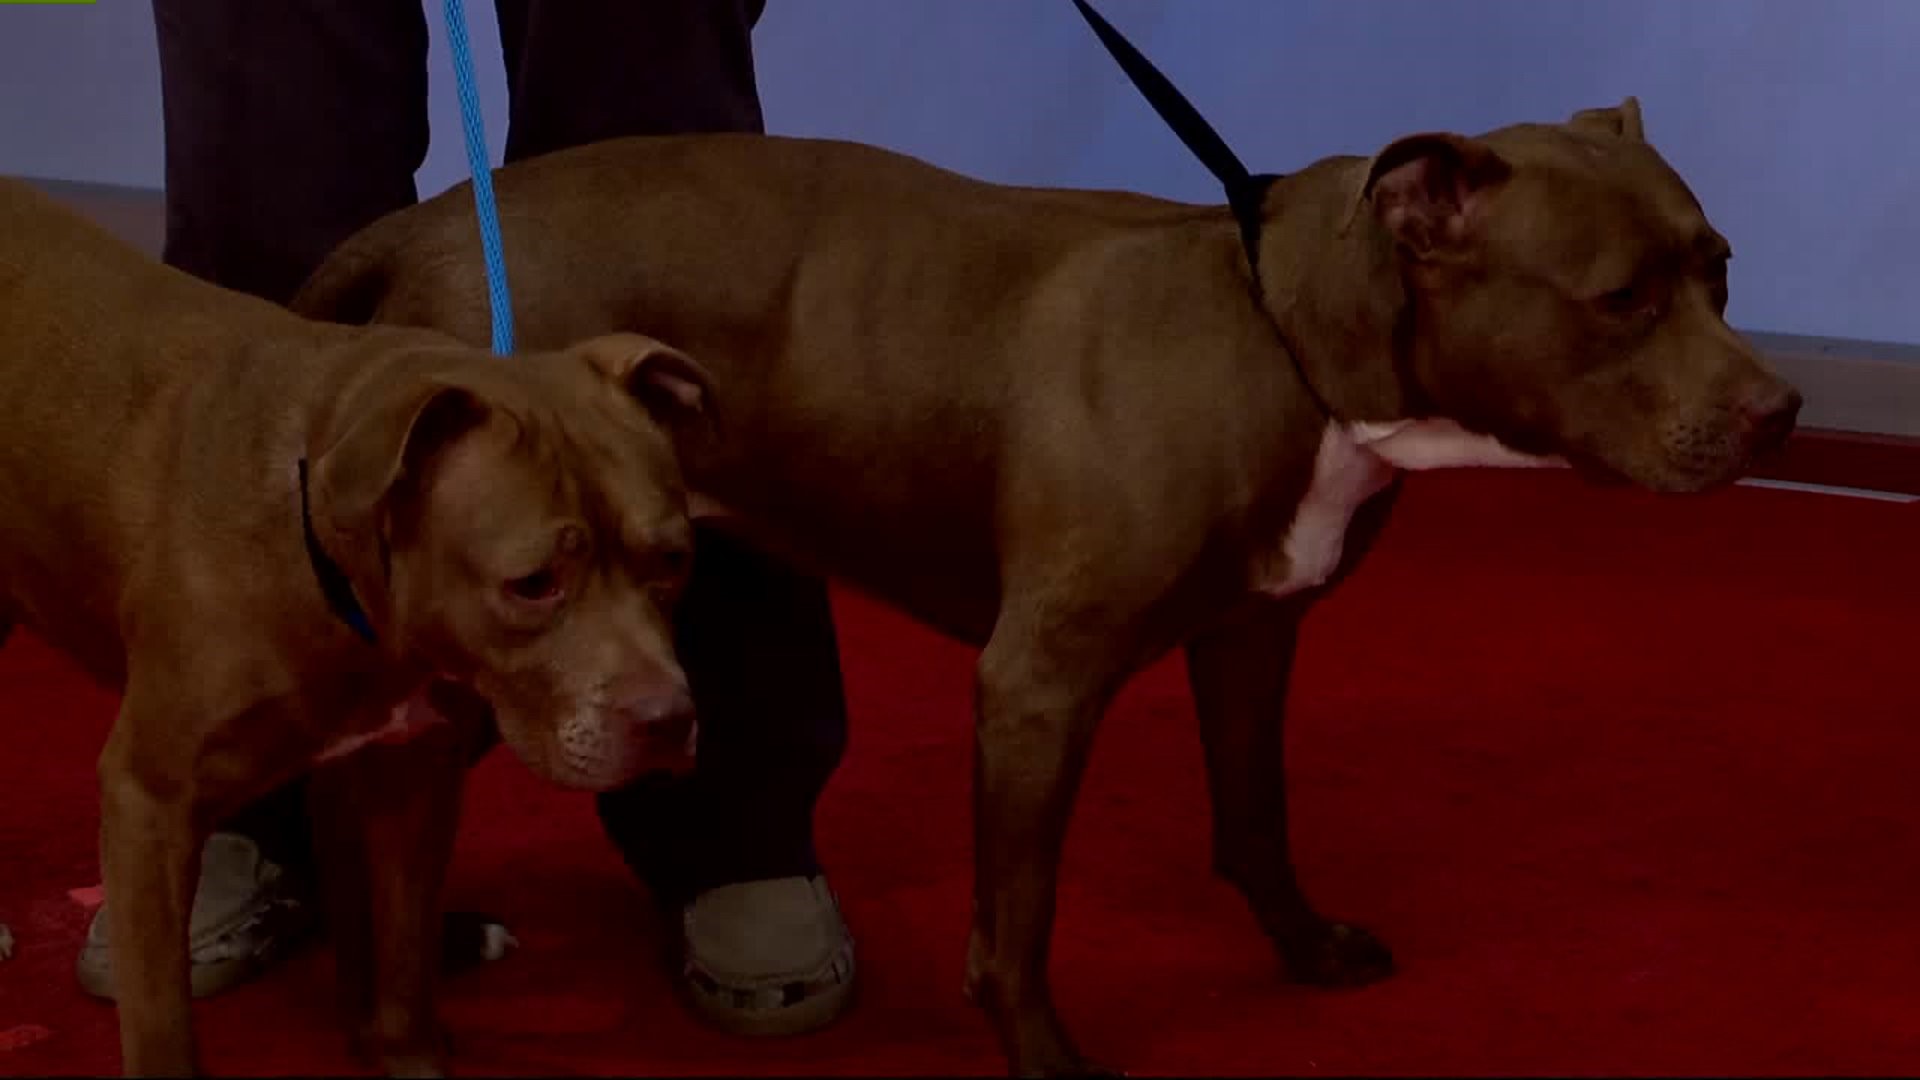 Furry Friends with Cocoa Bean and Choco, the pit bull terrier mixes